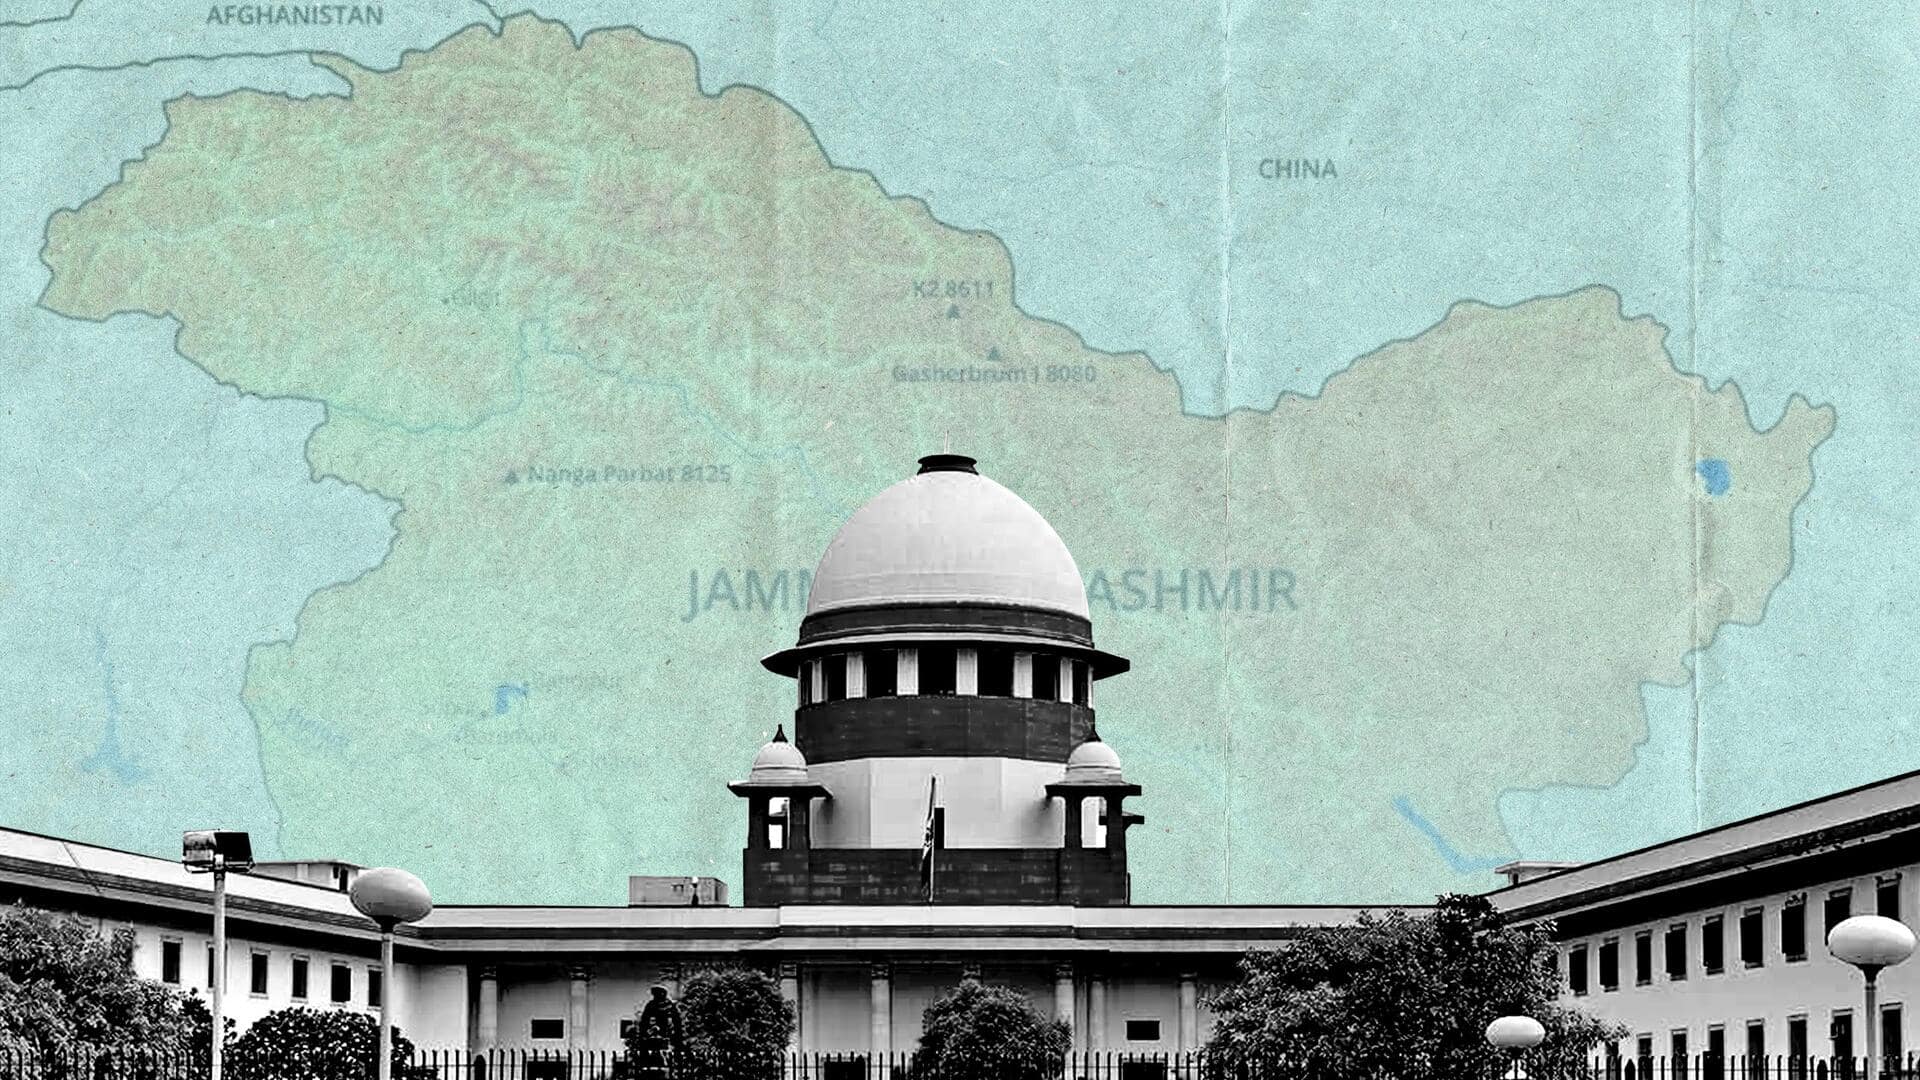 Ready for Jammu and Kashmir elections anytime: Centre tells SC